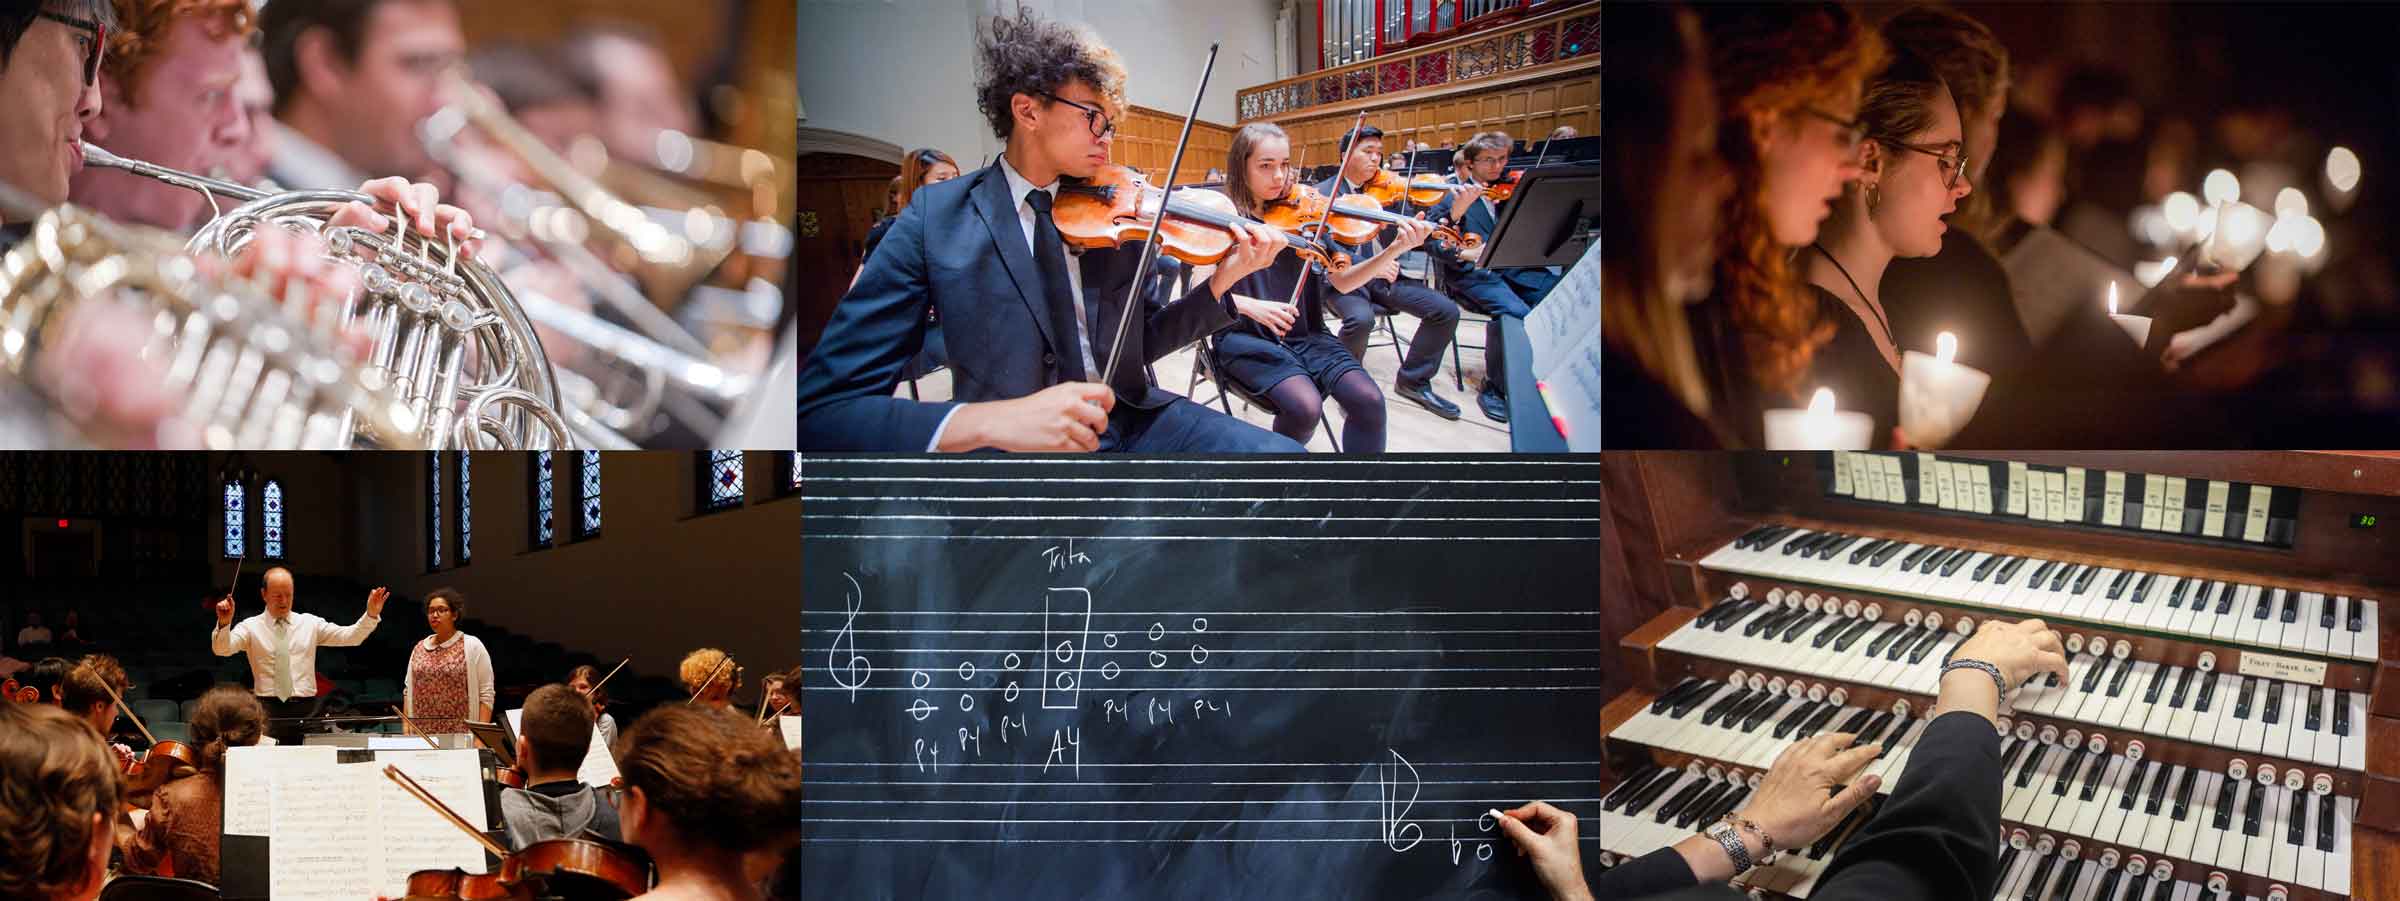 Photo collage of six images. From left to right and top to bottom: french horn player, group of violinists, choral group, conductor with hands raised facing the orchestra, musical notation on a chalk board, hands playing an organ.